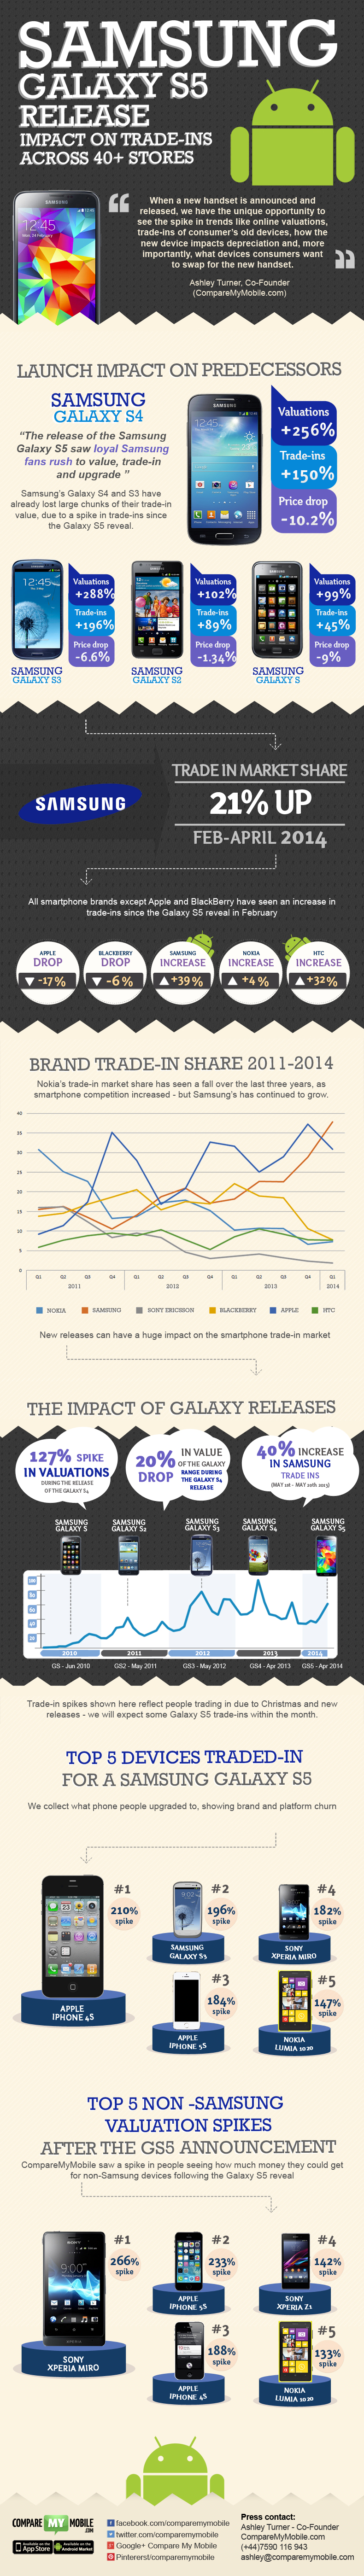 Larger version of CompareMyMobile's Samsung Galaxy S5 smartphone trade-in infographic